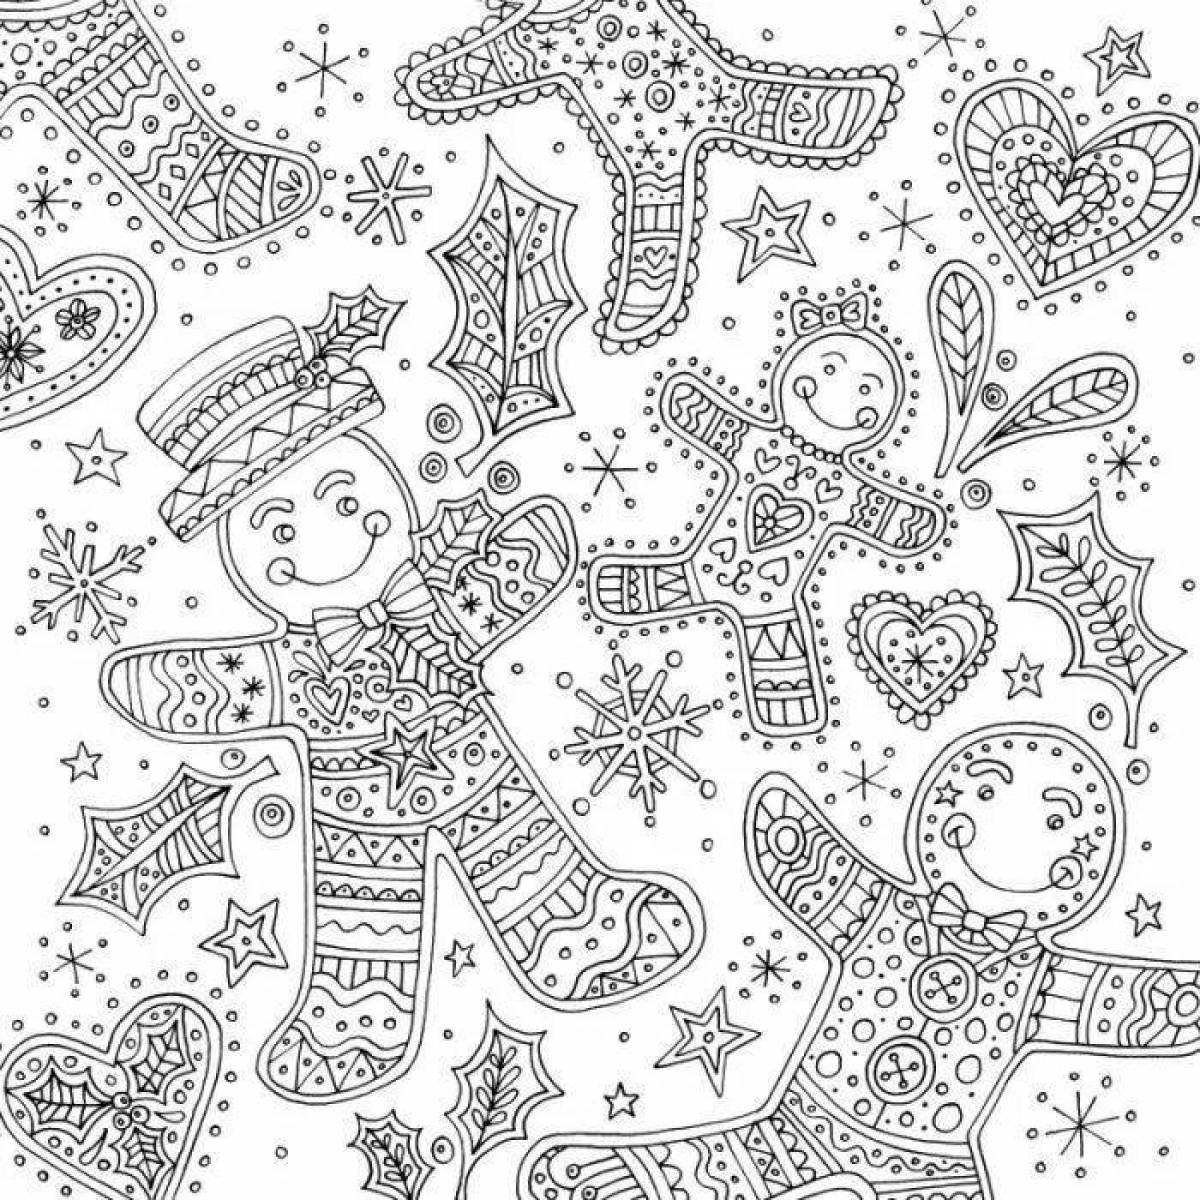 Great antistress winter coloring book